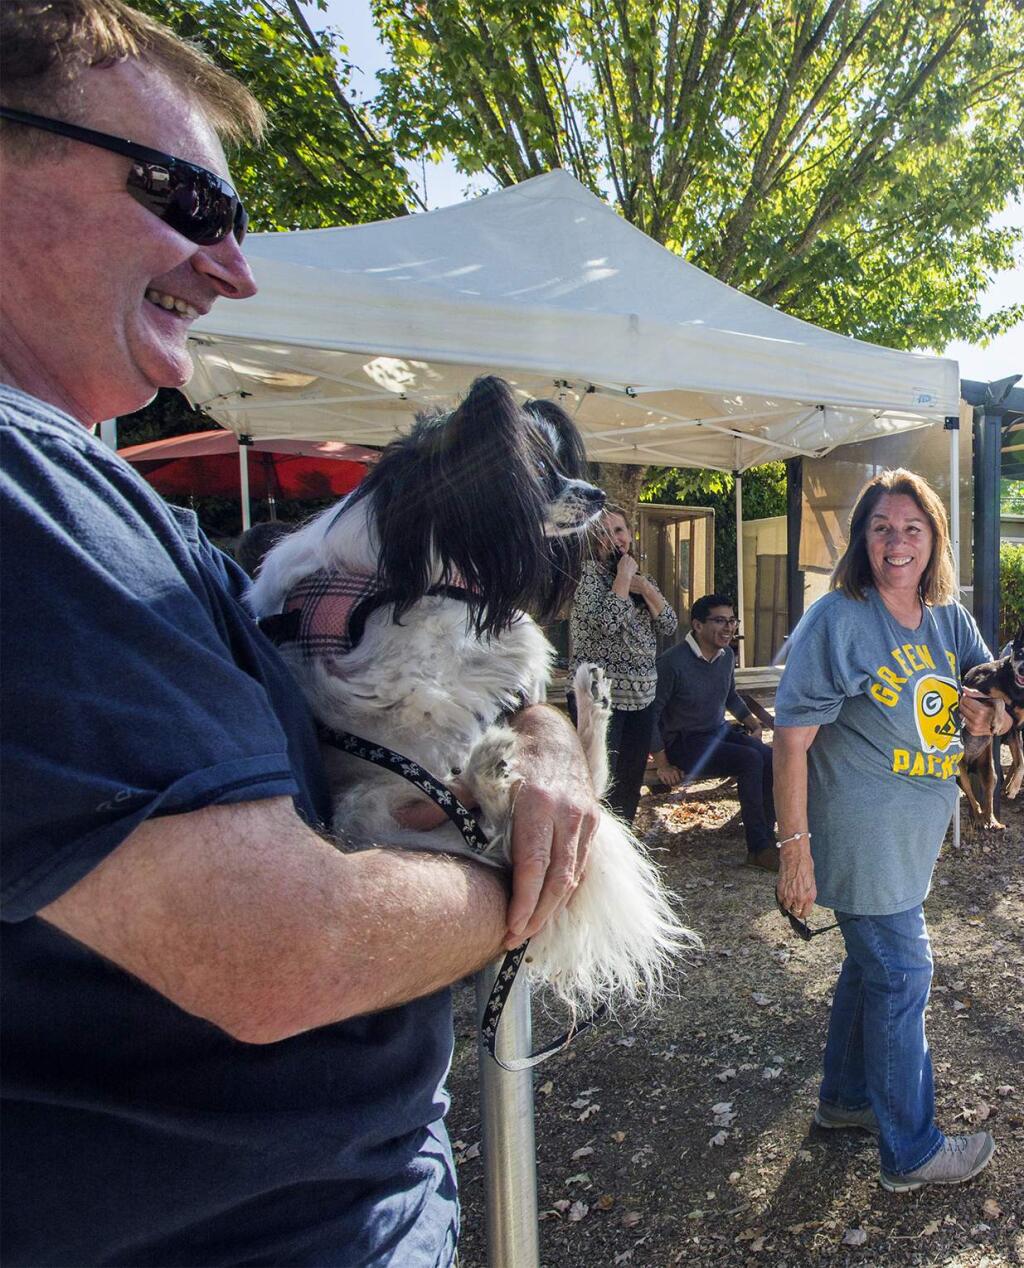 On the feast of St. Francis of Assisi, the patron saint of animals, locals brought their pets to Pets Lifeline for a blessing from Father Alvin, from St. Francis Solano Catholic Church (not shown). Pets Lifeline won a lenghty process to change from a non-conforming pet shelter to a conforming one, and plans to begin remodelling later this year. (Photo by Robbi Pengelly/Index-Tribune)